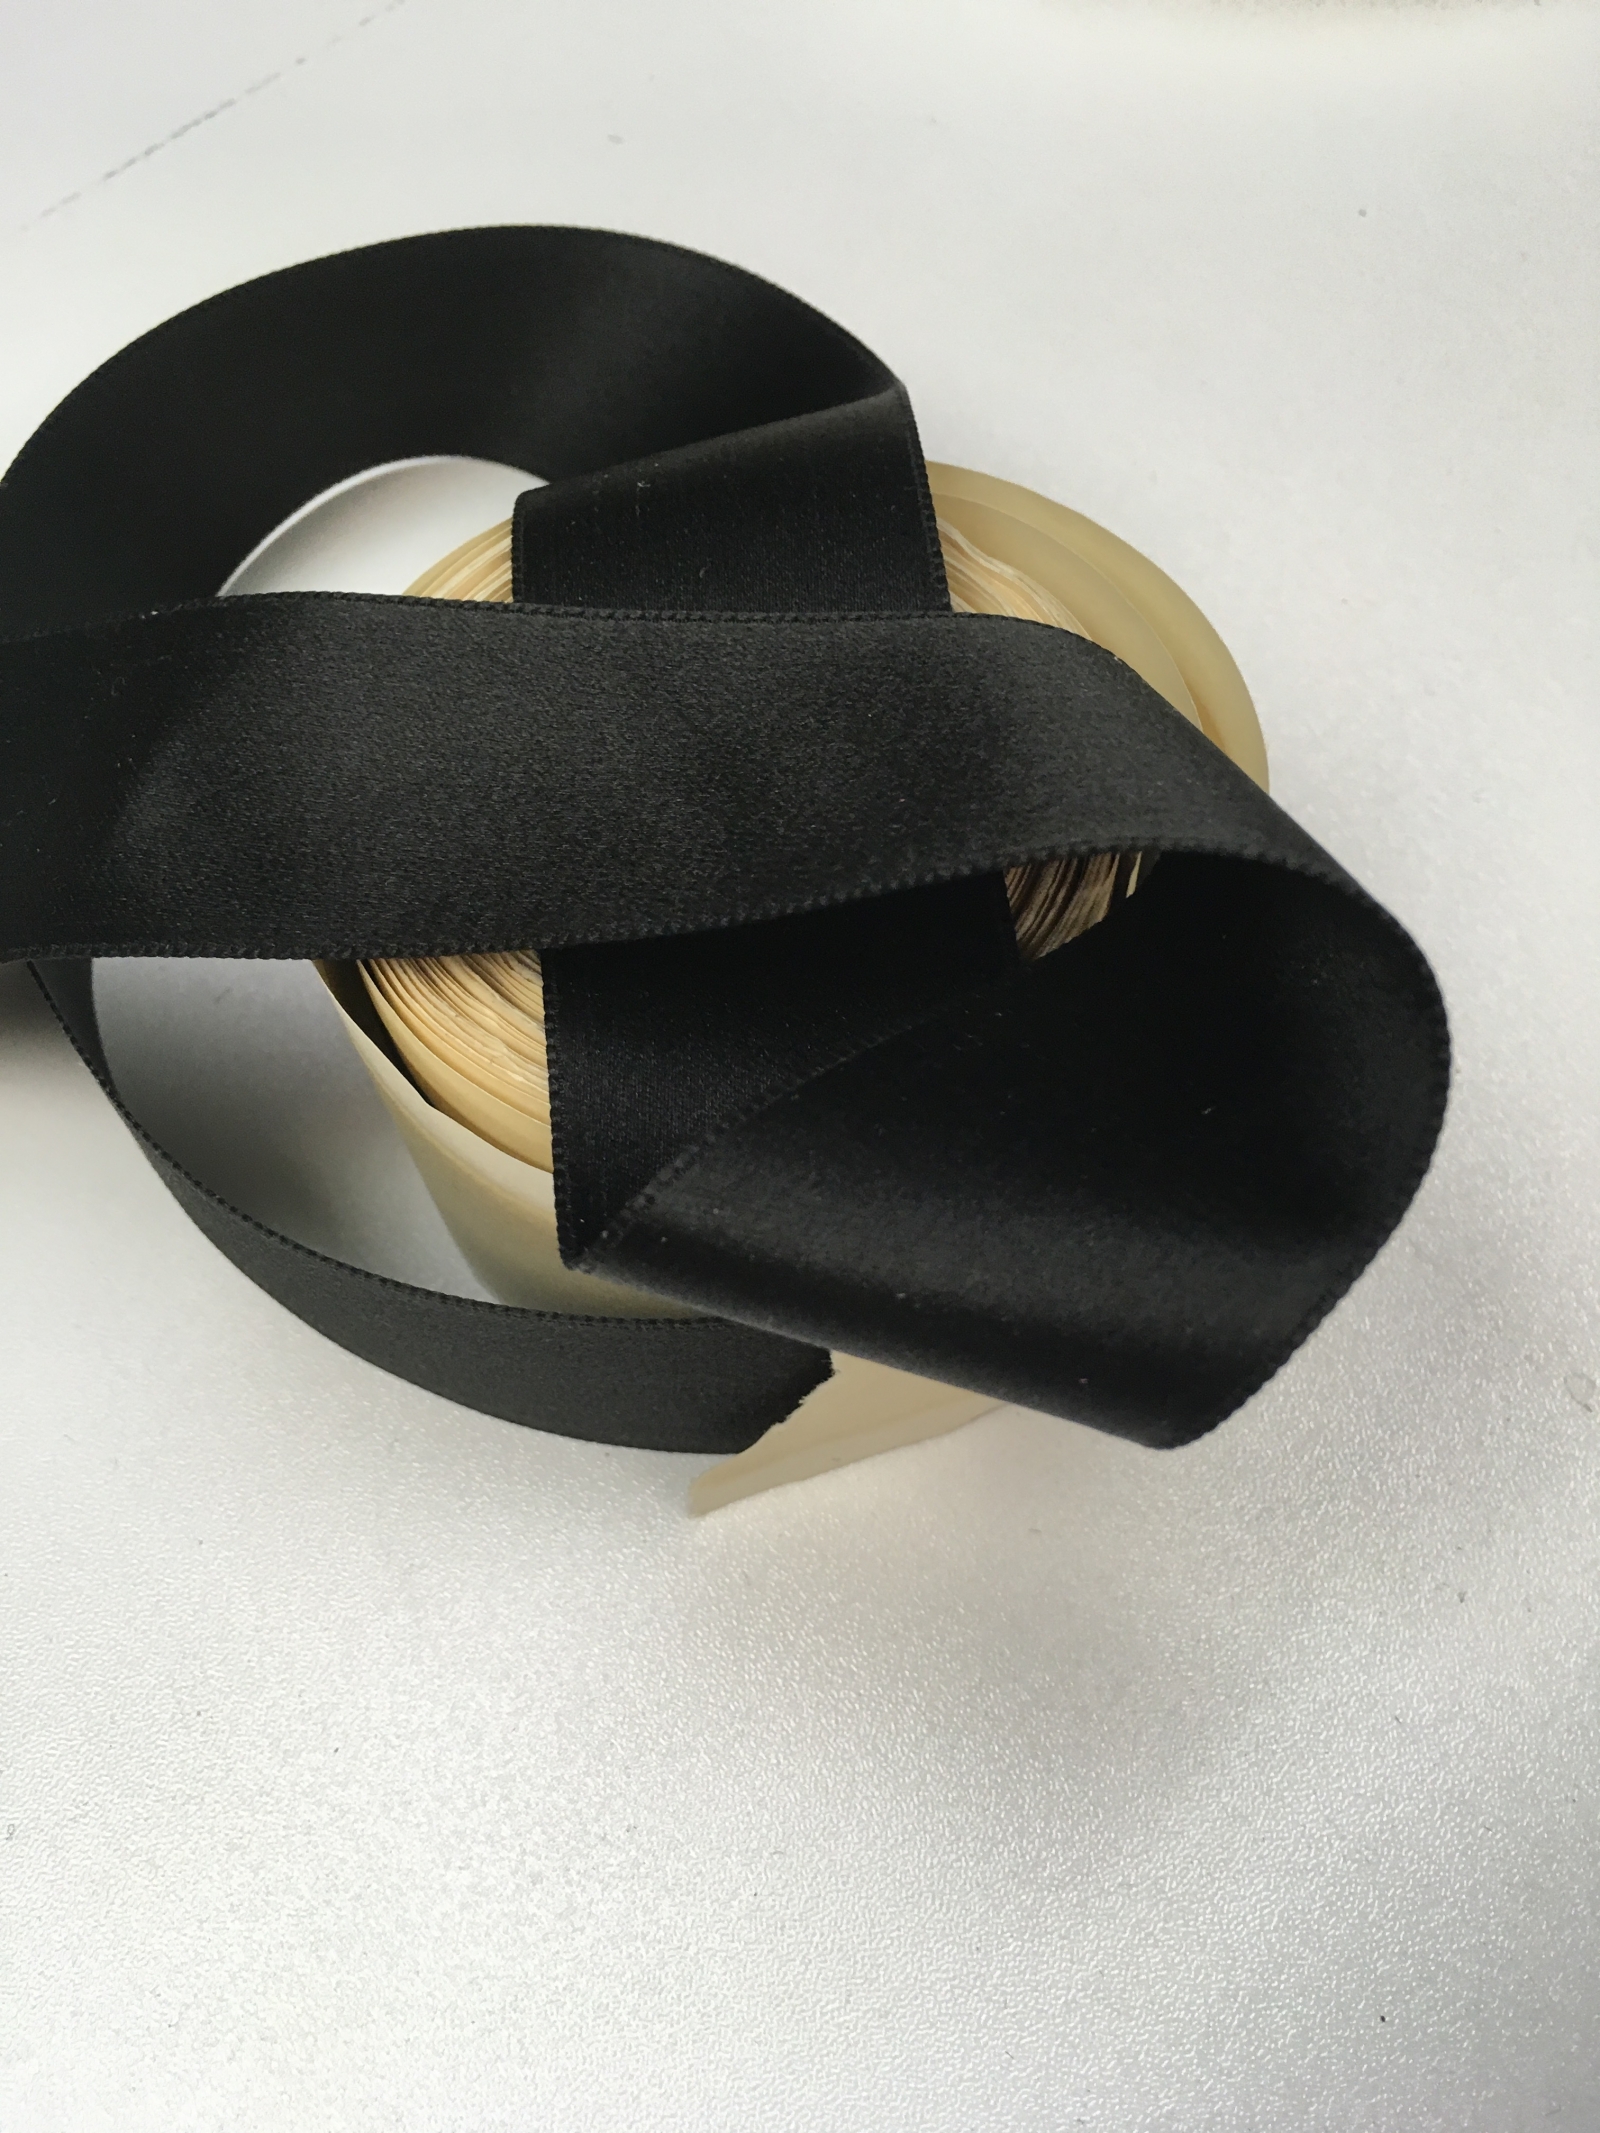 Black silk ribbon as background, abstract and luxury brand desig #3  Photograph by Anneleven Store - Fine Art America